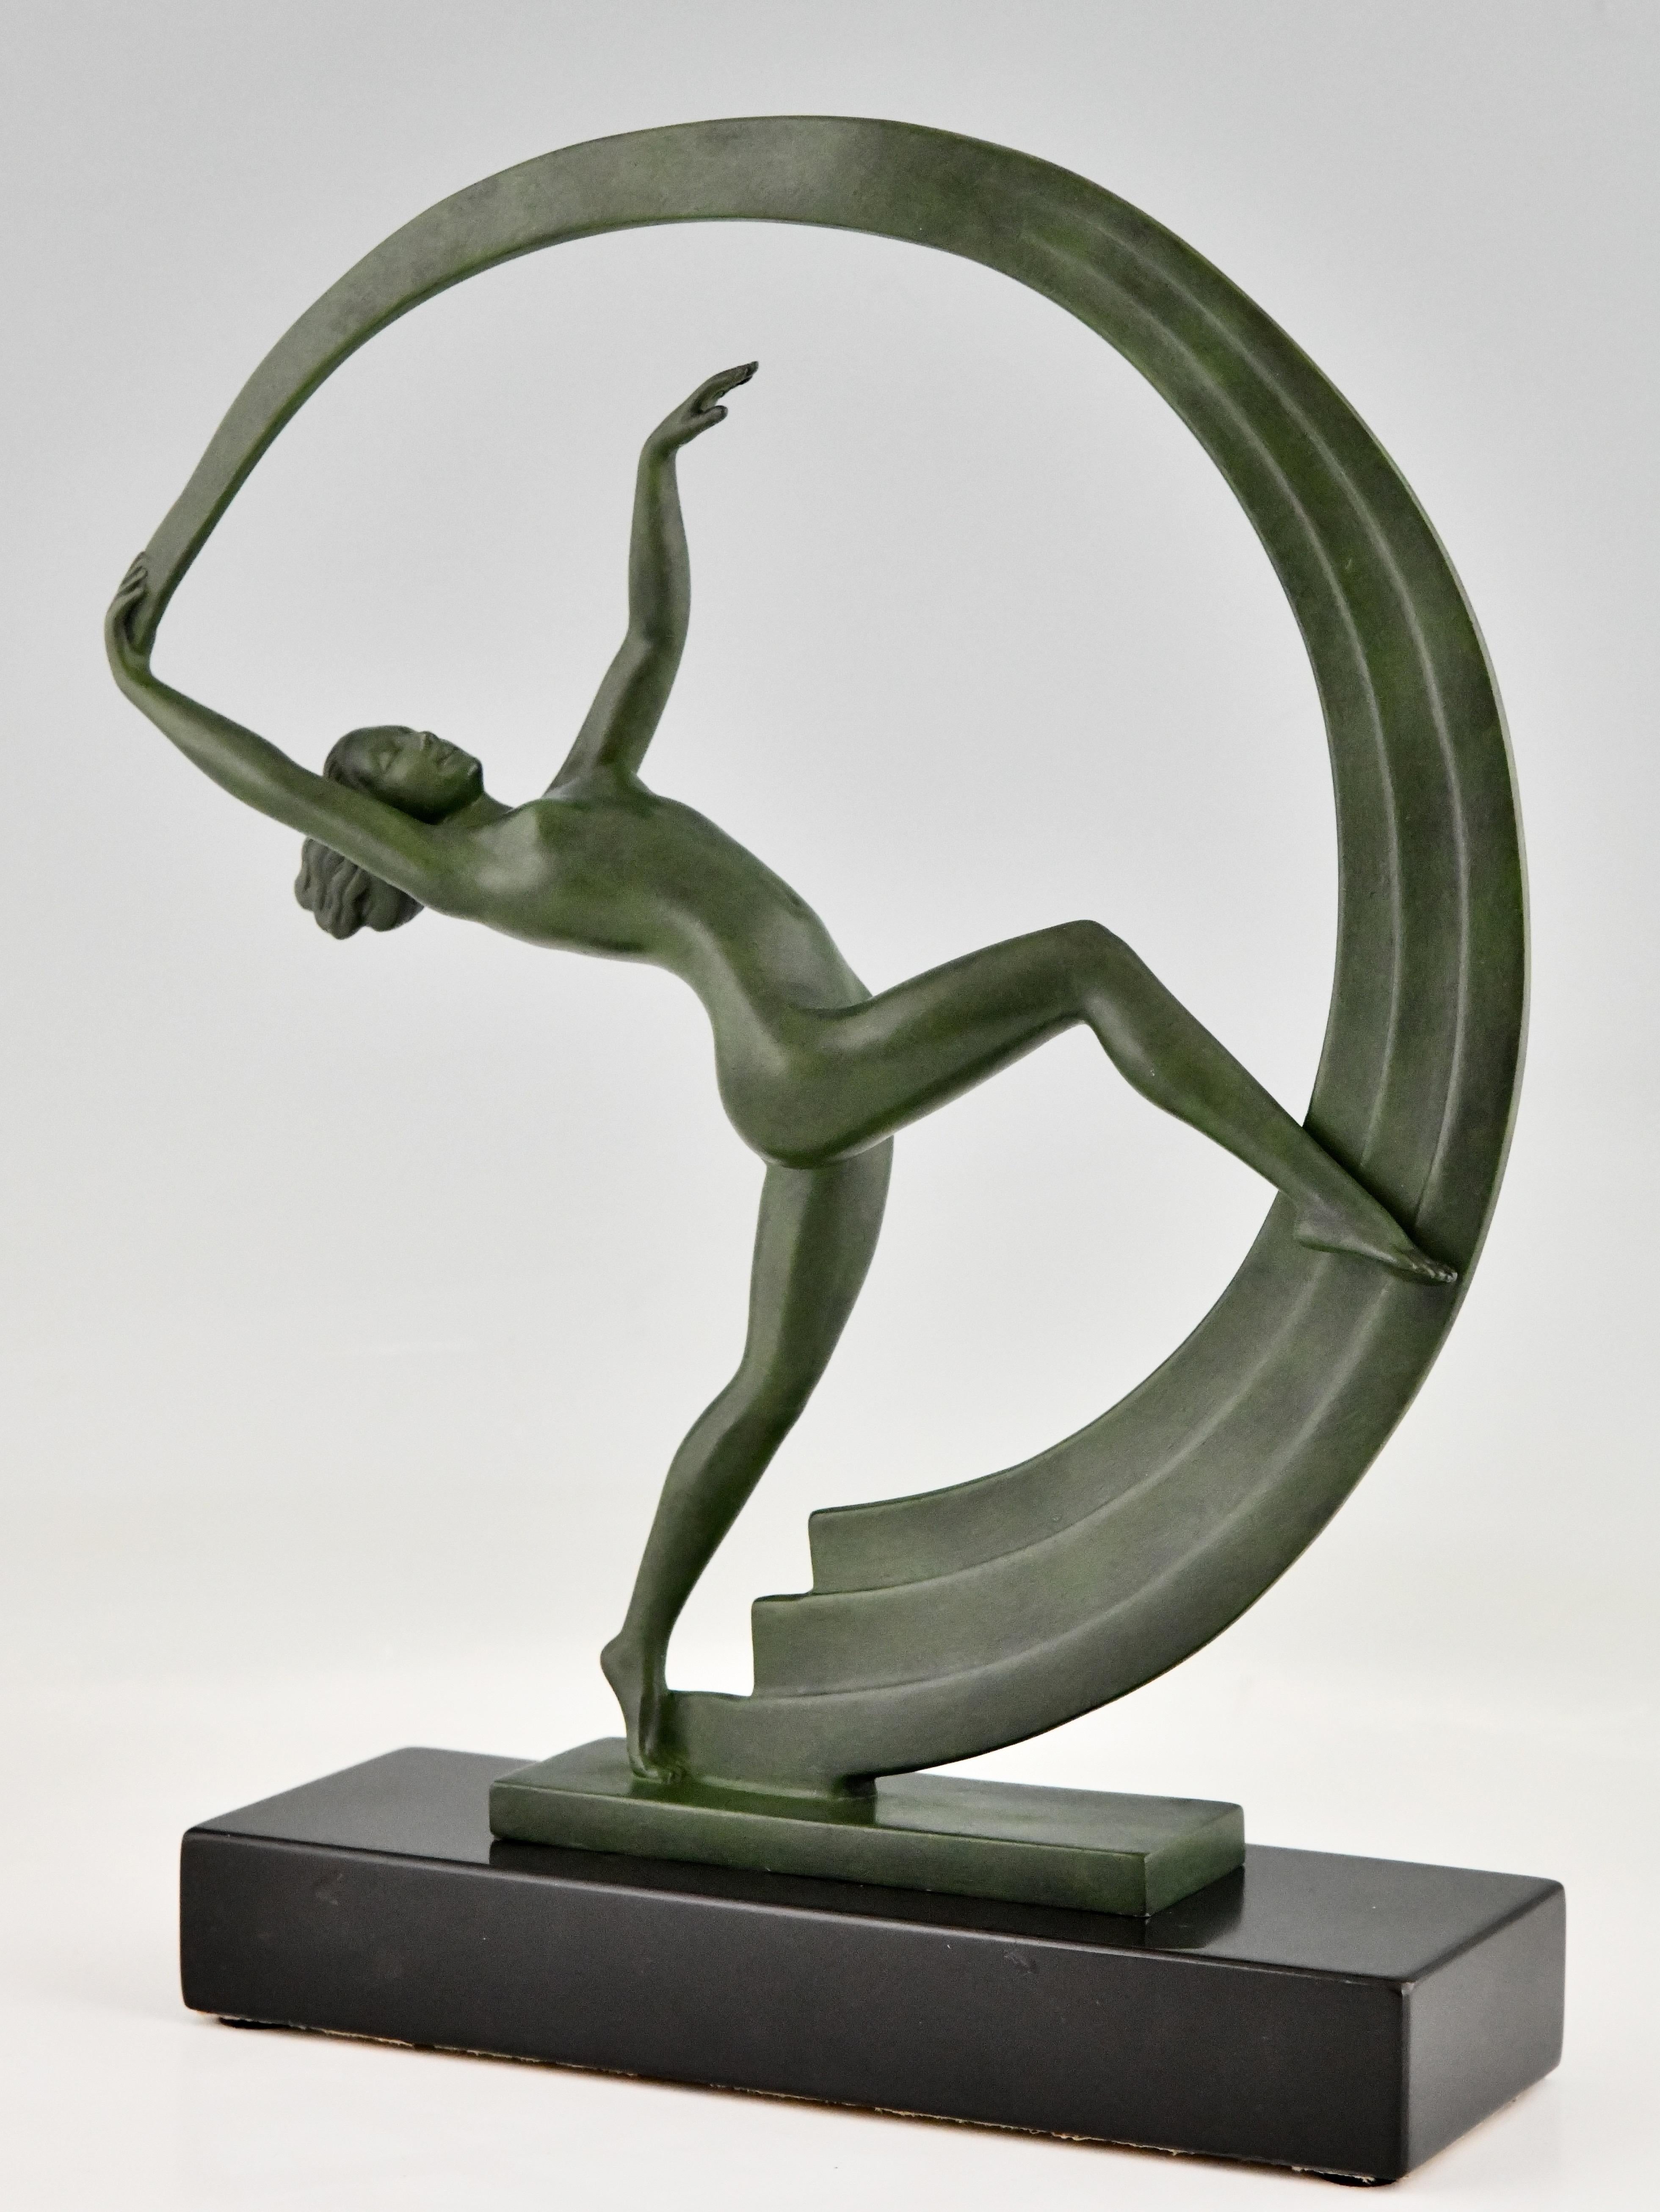 Art Deco sculpture nude scarf dancer Bacchanale by Janle for Max Le Verrier. Patinated art metal on a black marble base. France 1930.

Literature: This sculpture is illustrated in “Art Deco sculpture” by Alastair Duncan.